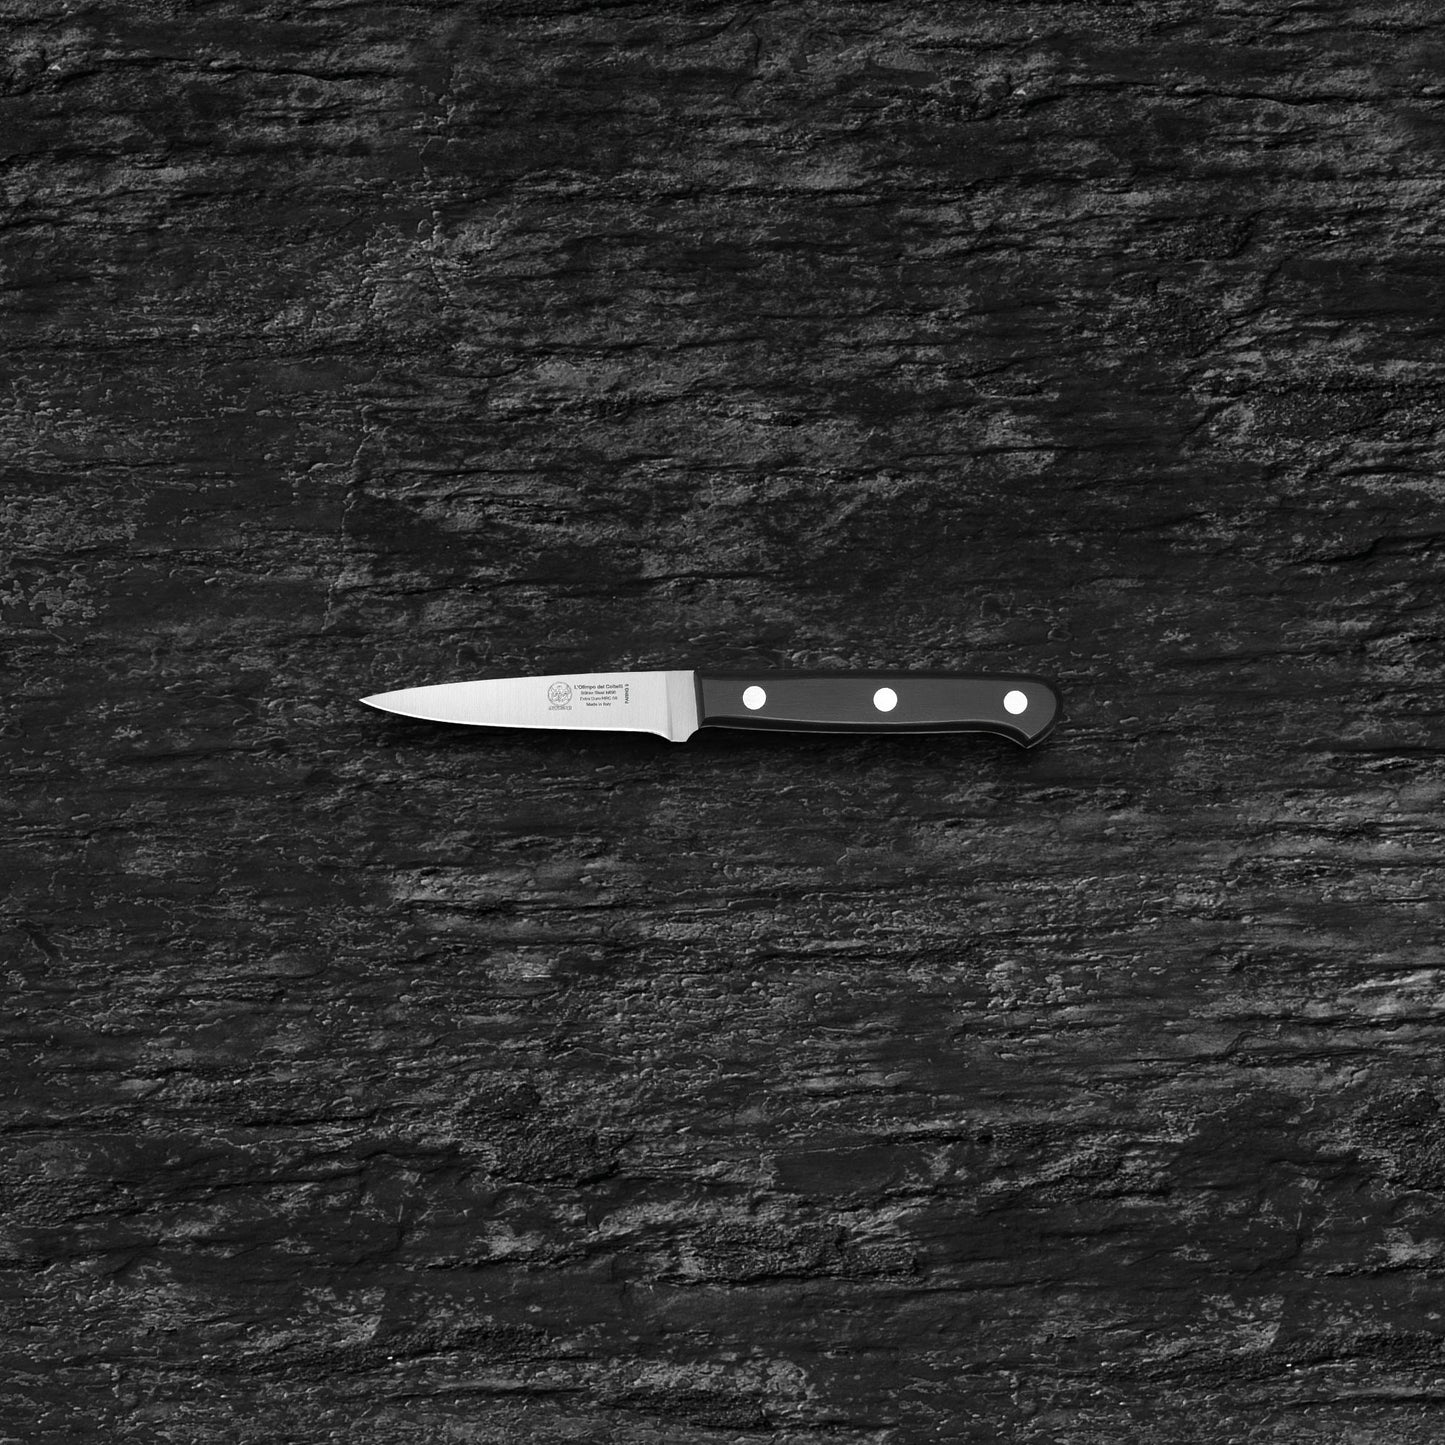 
                  
                    Paring Kitchen Knife - Blade 3.54" - N690 Stainless Steel - Hrc 60 - Black Technical Polymer Handle
                  
                